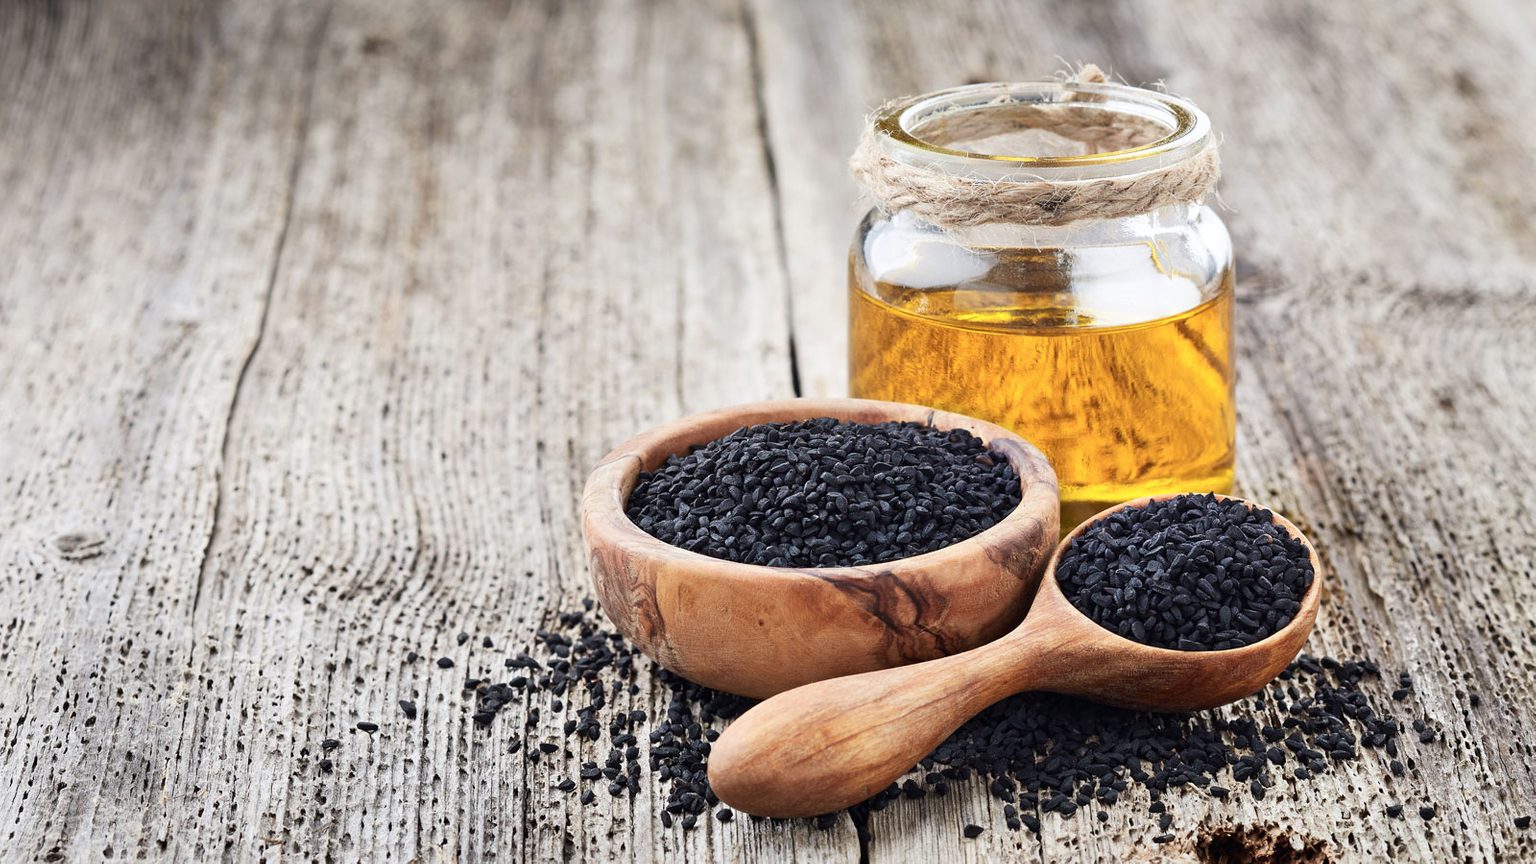 Black Seed Oil For Weight Loss: Does It Really Work ...